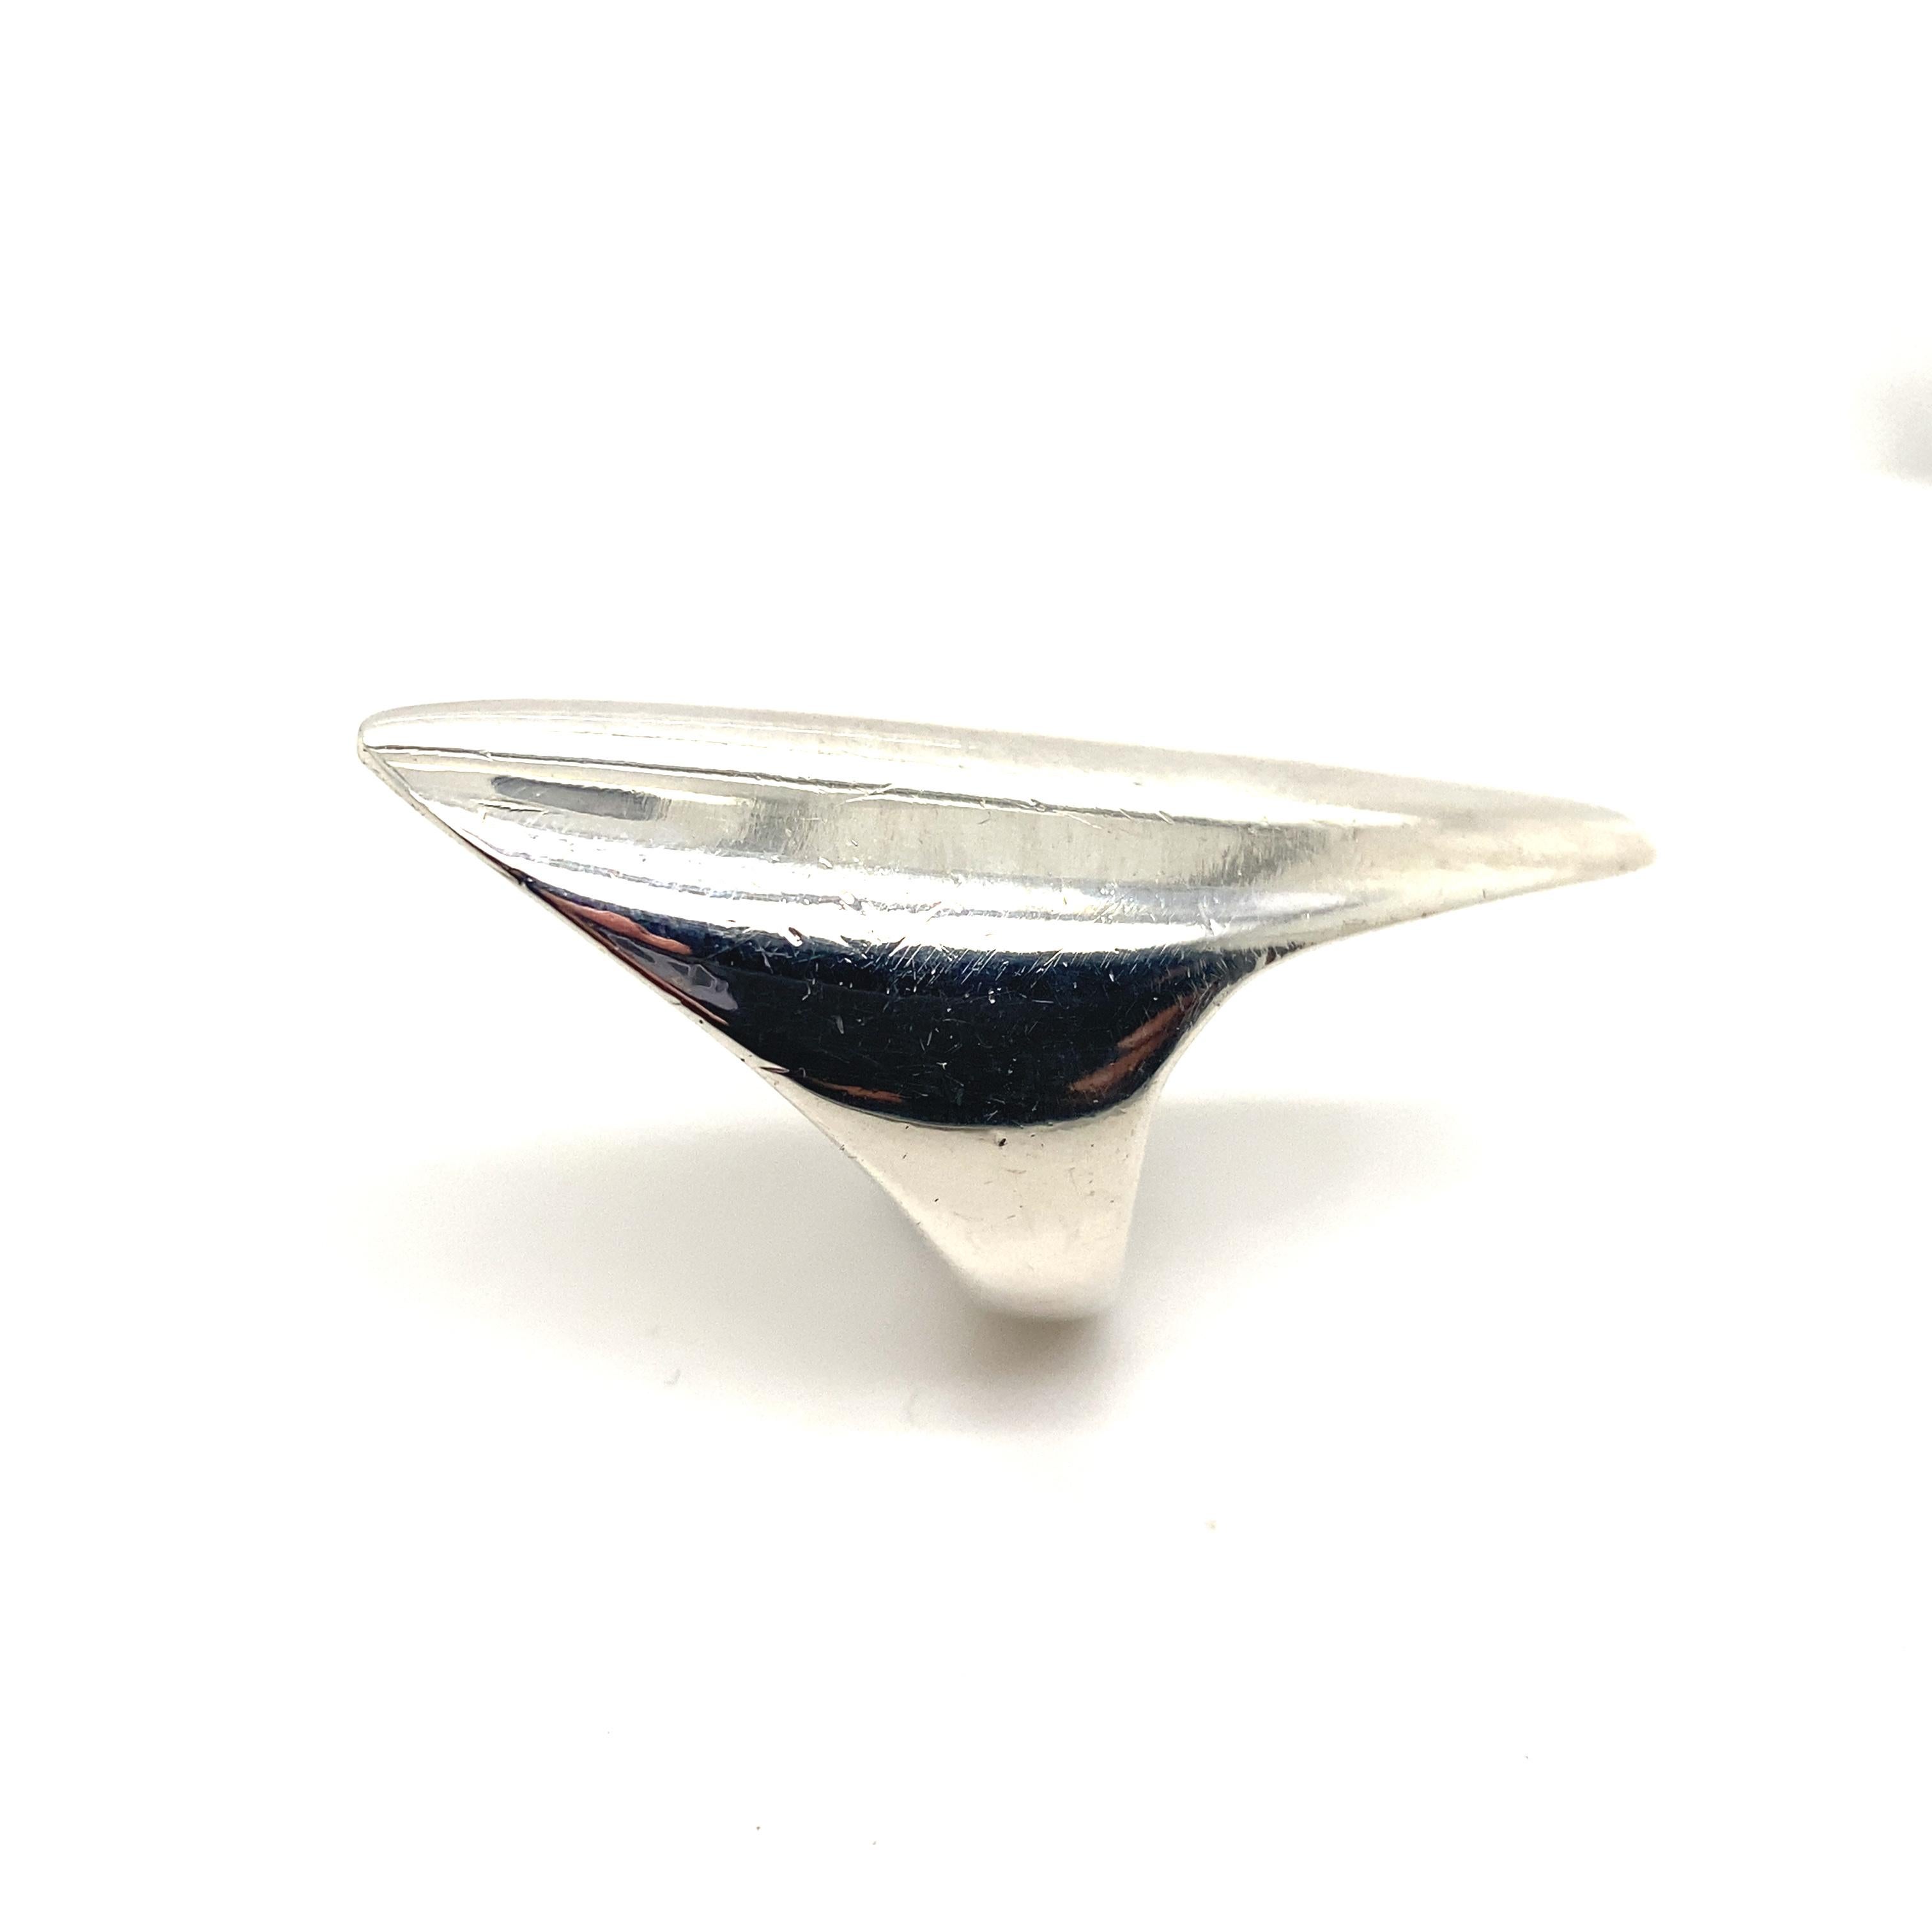 A Nanna Ditzel for Georg Jensen silver ring, Denmark circa 1960.

Designed as an elegant curved silver sculptural form, this ring sits beautifully on the finger, catching the light when viewed from different angles.

Nanna Ditzel (1923 - 2005) was